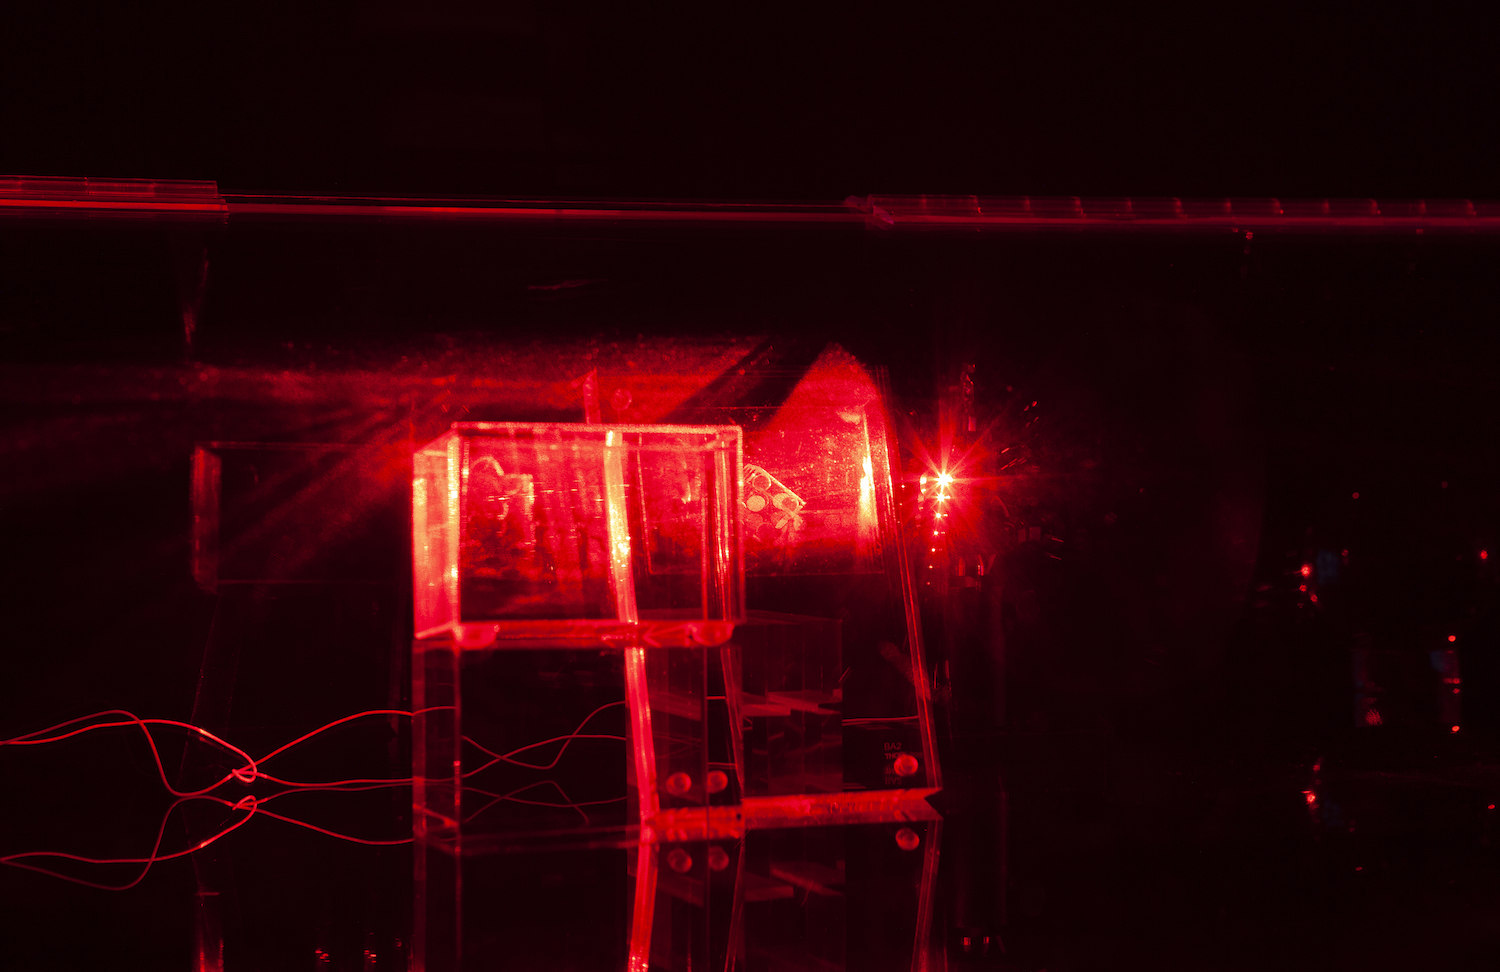 Constantina Zavitsanos, *Boxed Bet*, 2019. Transmission holograms, acrylic mounts, 5mW red laser. Detail view